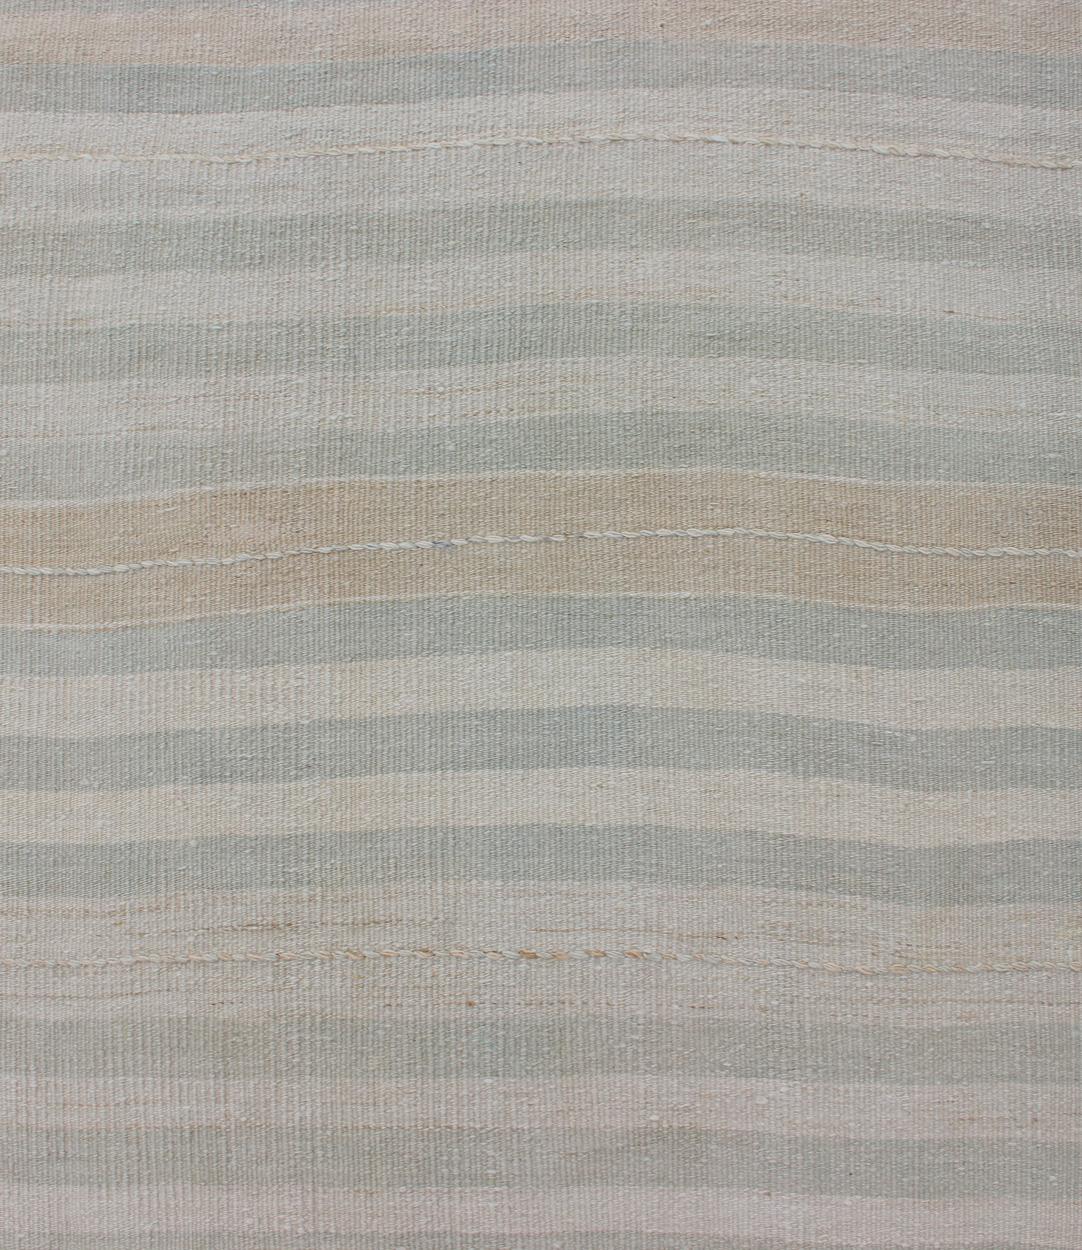 Wool Vintage Turkish Kilim Runner with a Stripe and Modern Design in Neutral Tones For Sale